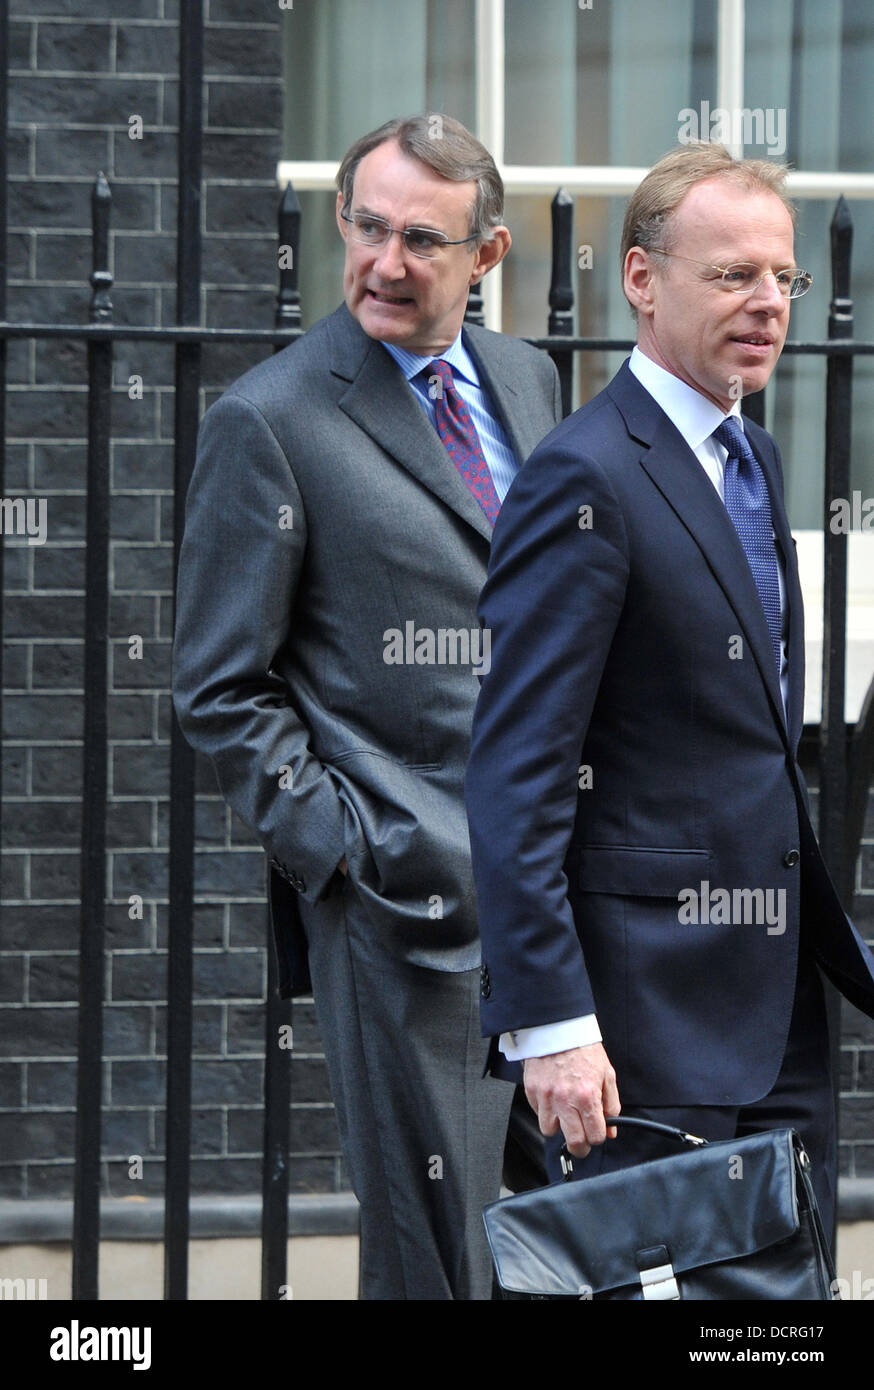 Heineken CEO Jean-Francois van Boxmeer (R) leaves 10 Downing Street after a  business breakfast with Nick Clegg and Dutch Prime Minister Mark Rutte.  London, England - 15.11.11 Stock Photo - Alamy